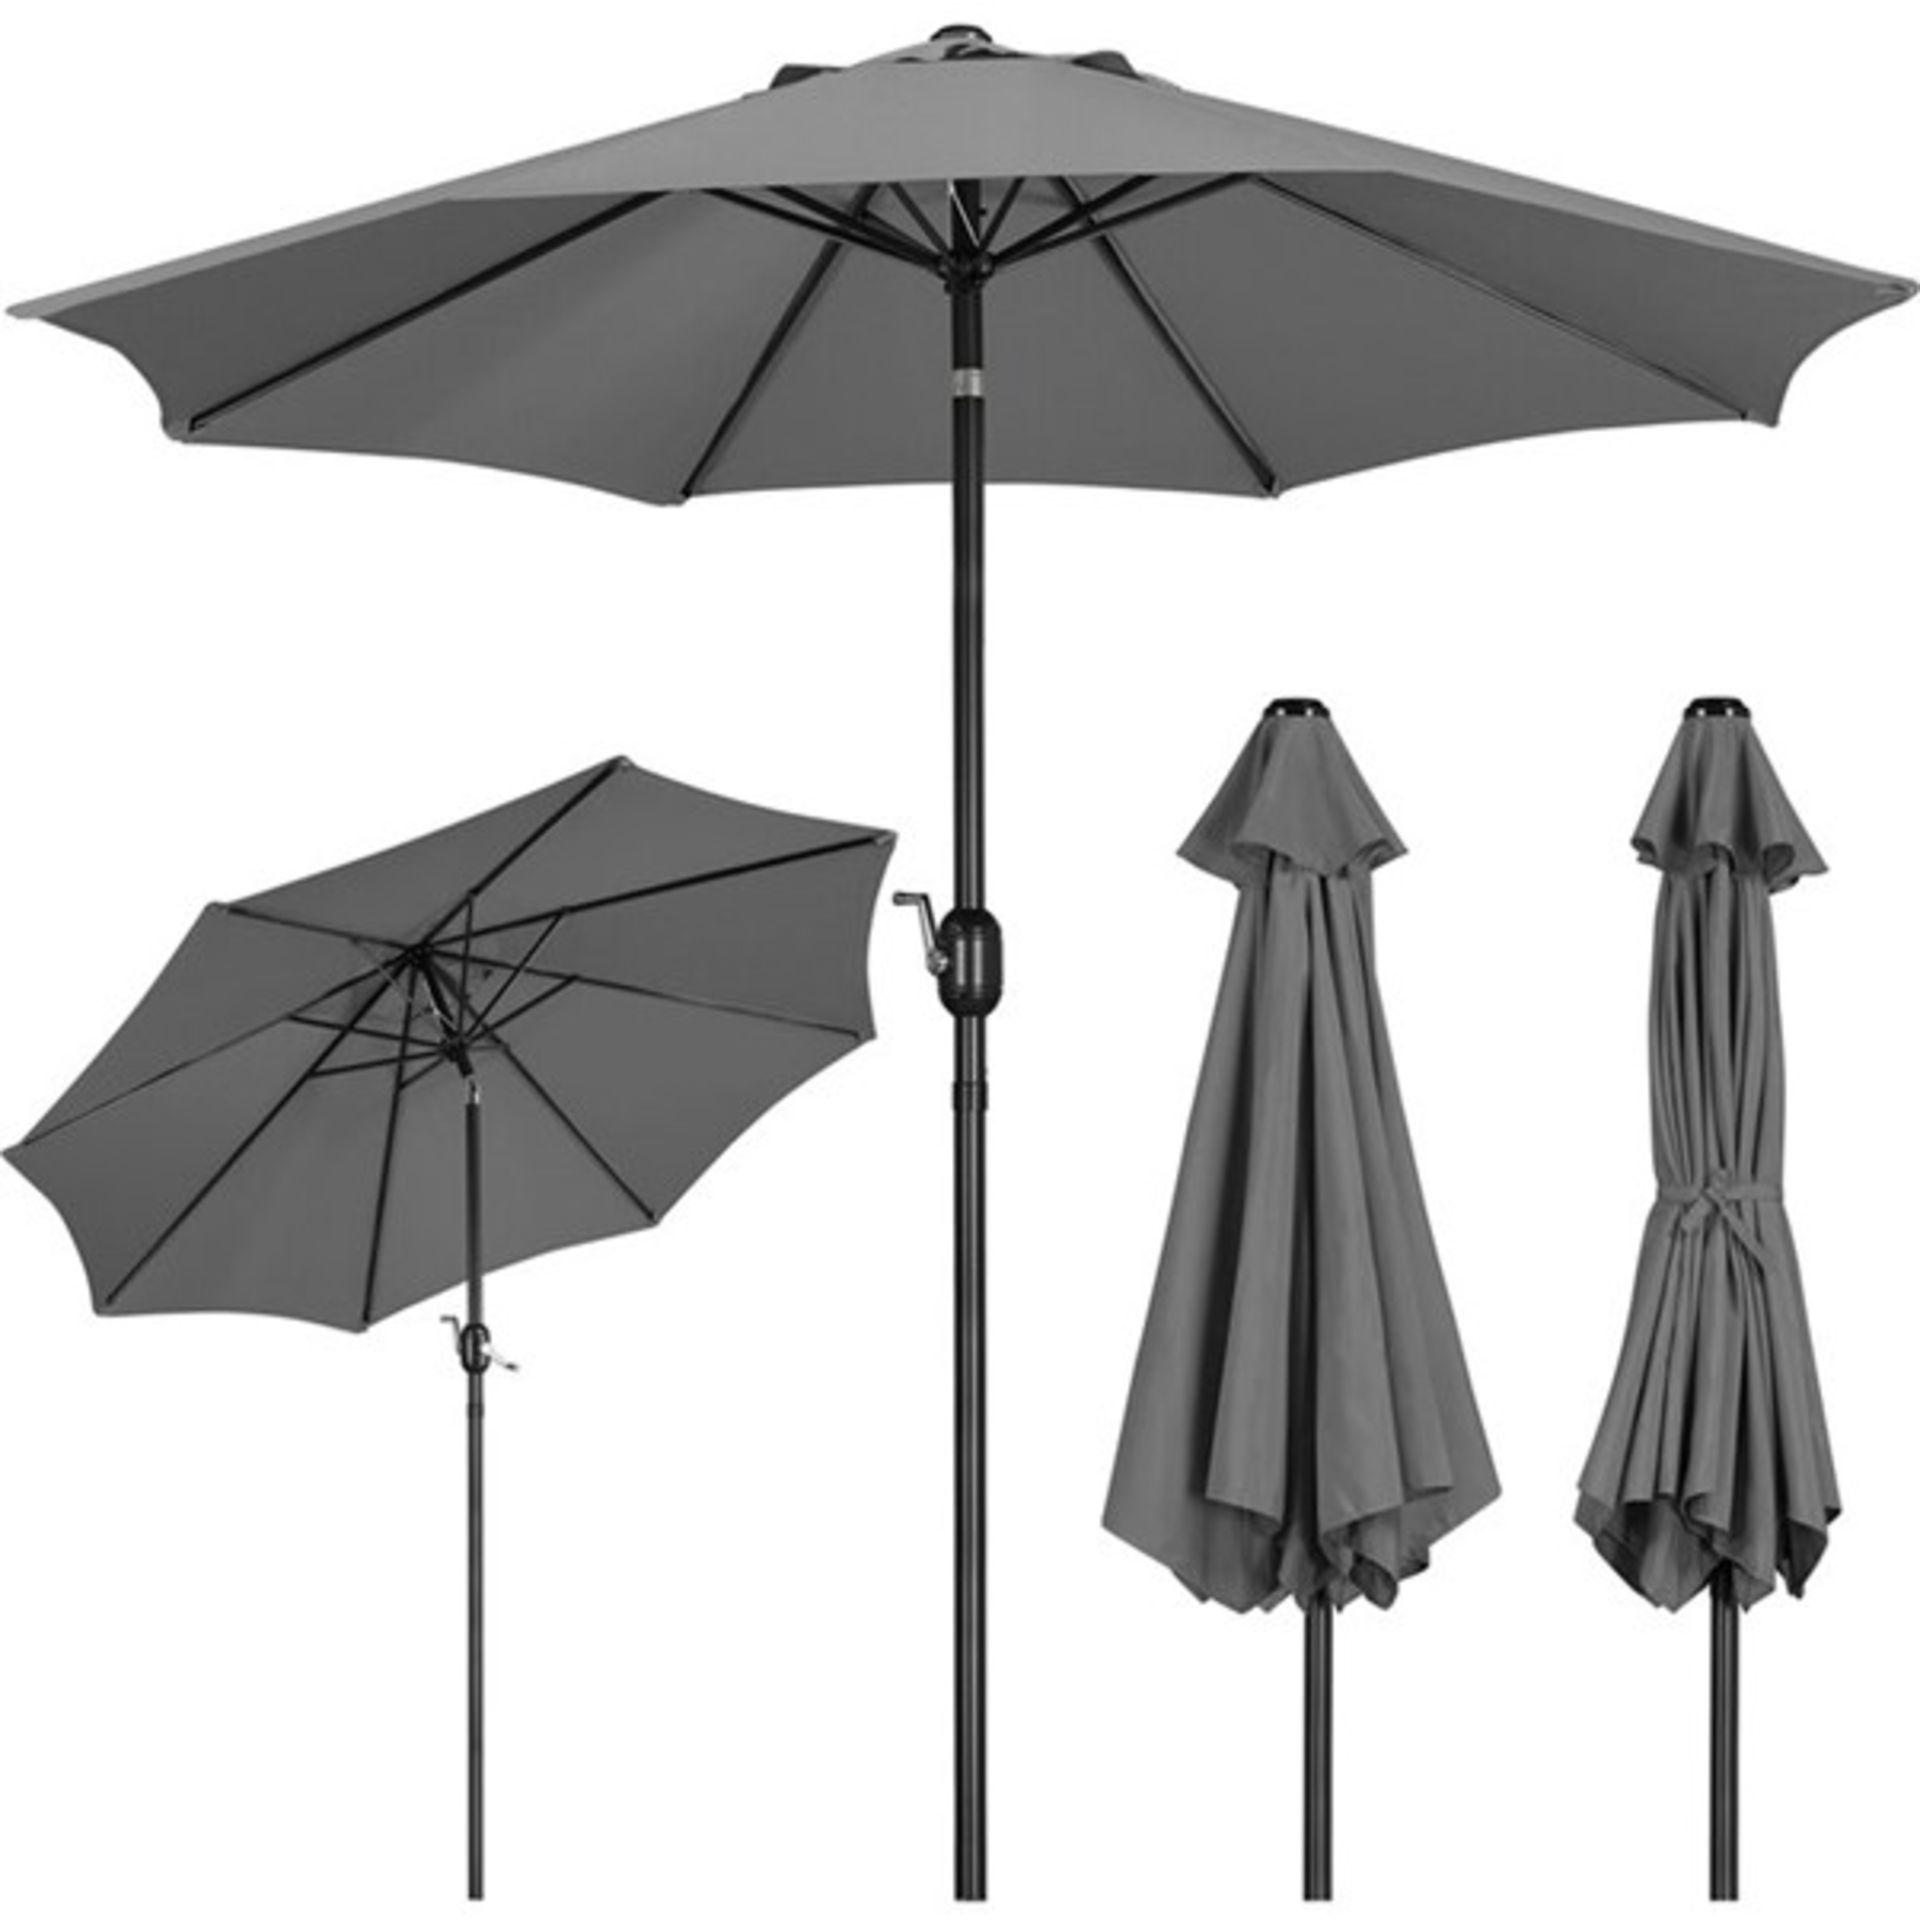 RRP £85.99 - Arnoldine 2.6m Traditional Parasol - 261 W x 261 - With a few minutes of assembly, this - Image 2 of 3